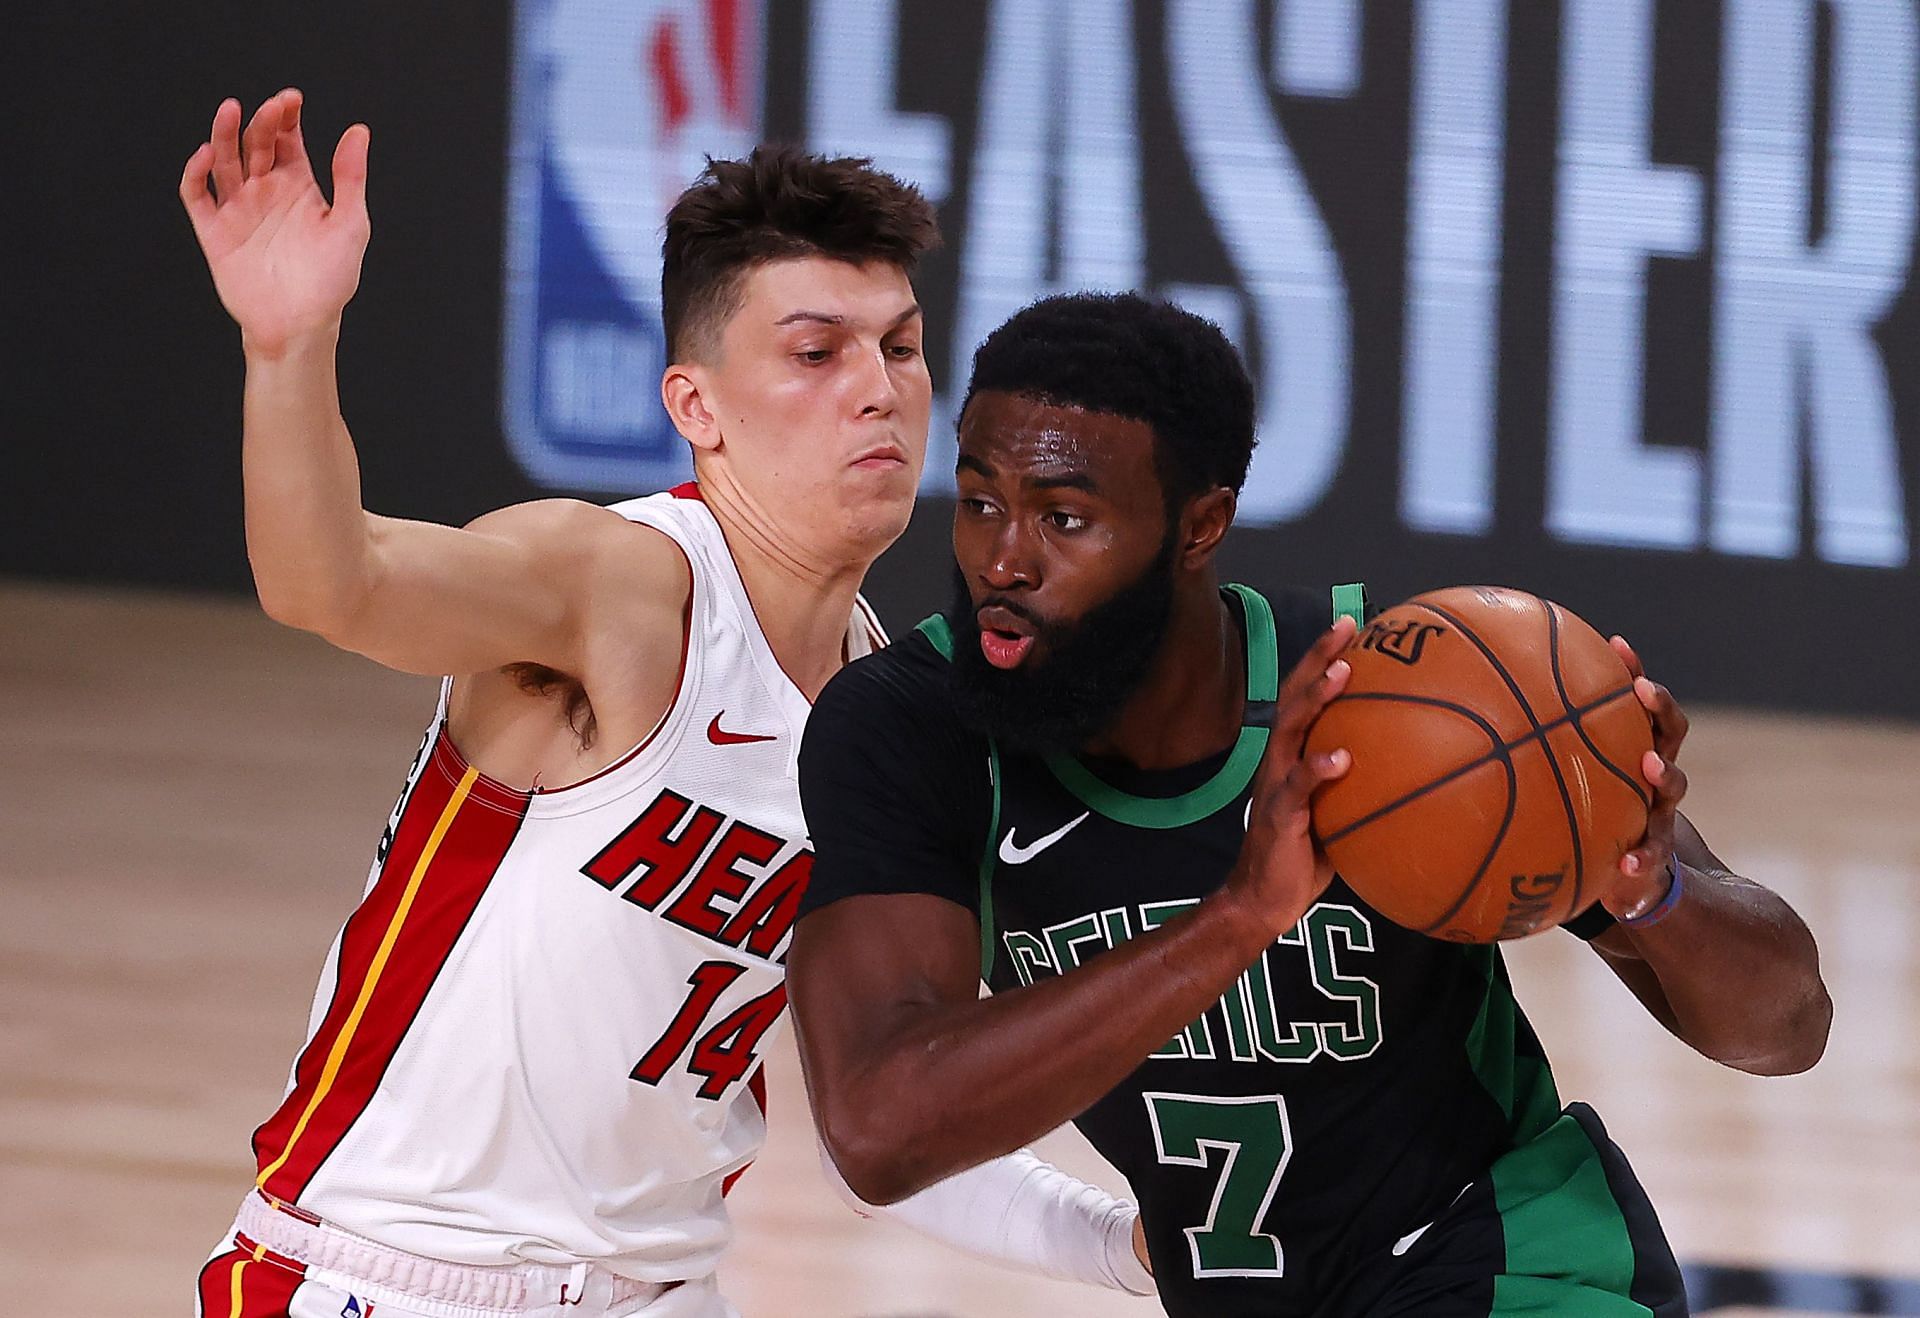 Tyler Herro #14 of the Miami Heat defends Jaylen Brown #7 of the Boston Celtics are two of the best shooters aged 25 or under in the NBA&#039;s Eastern Conference